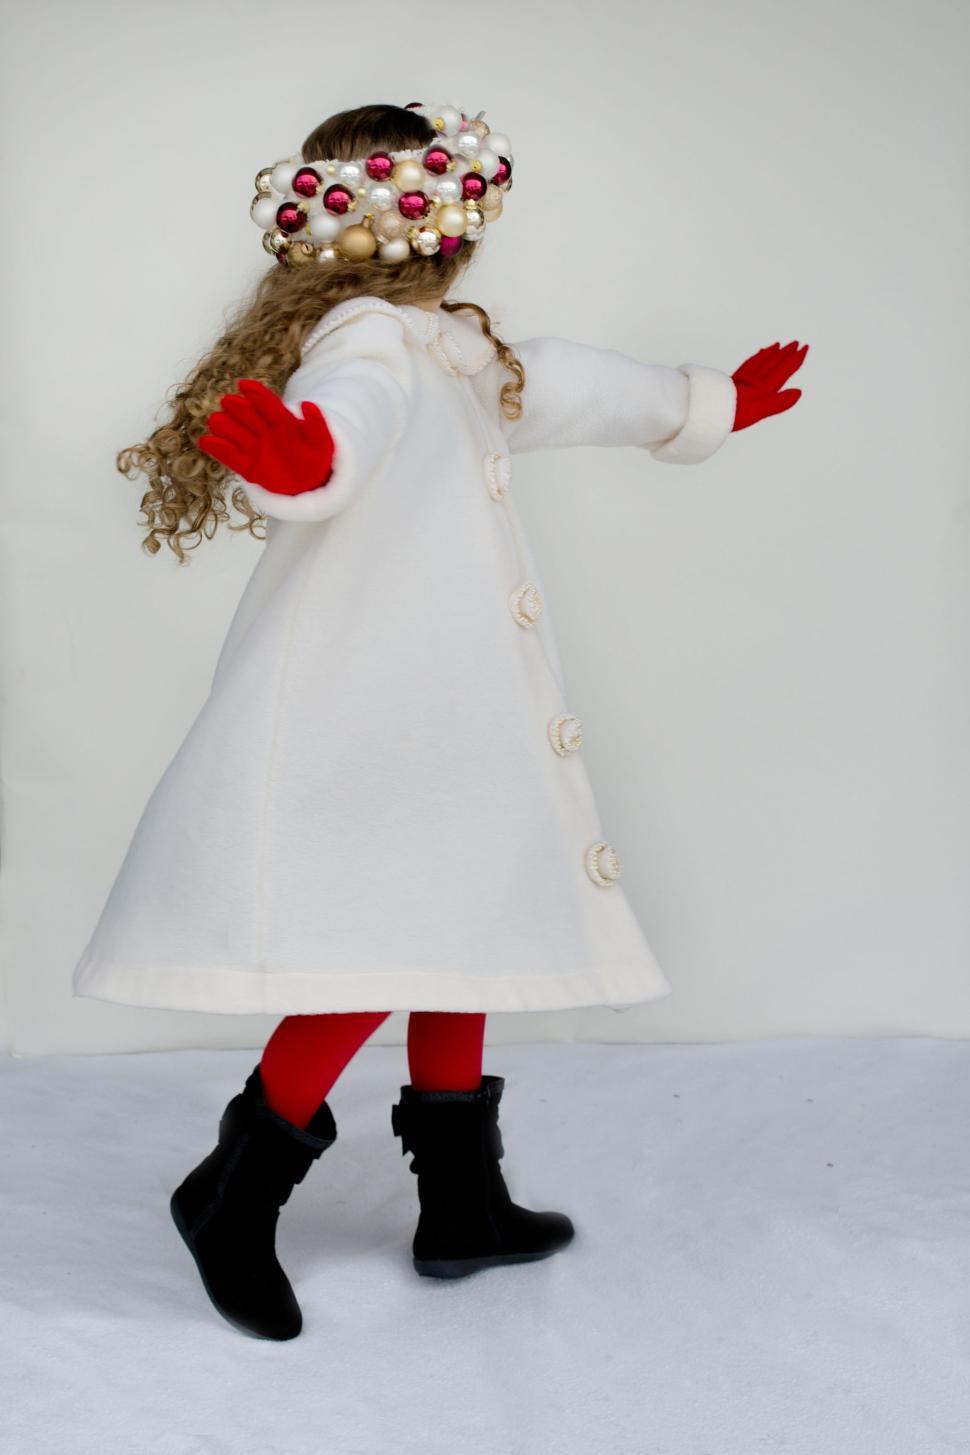 Free Image of Little girl in pearl headband with red gloves on white background 